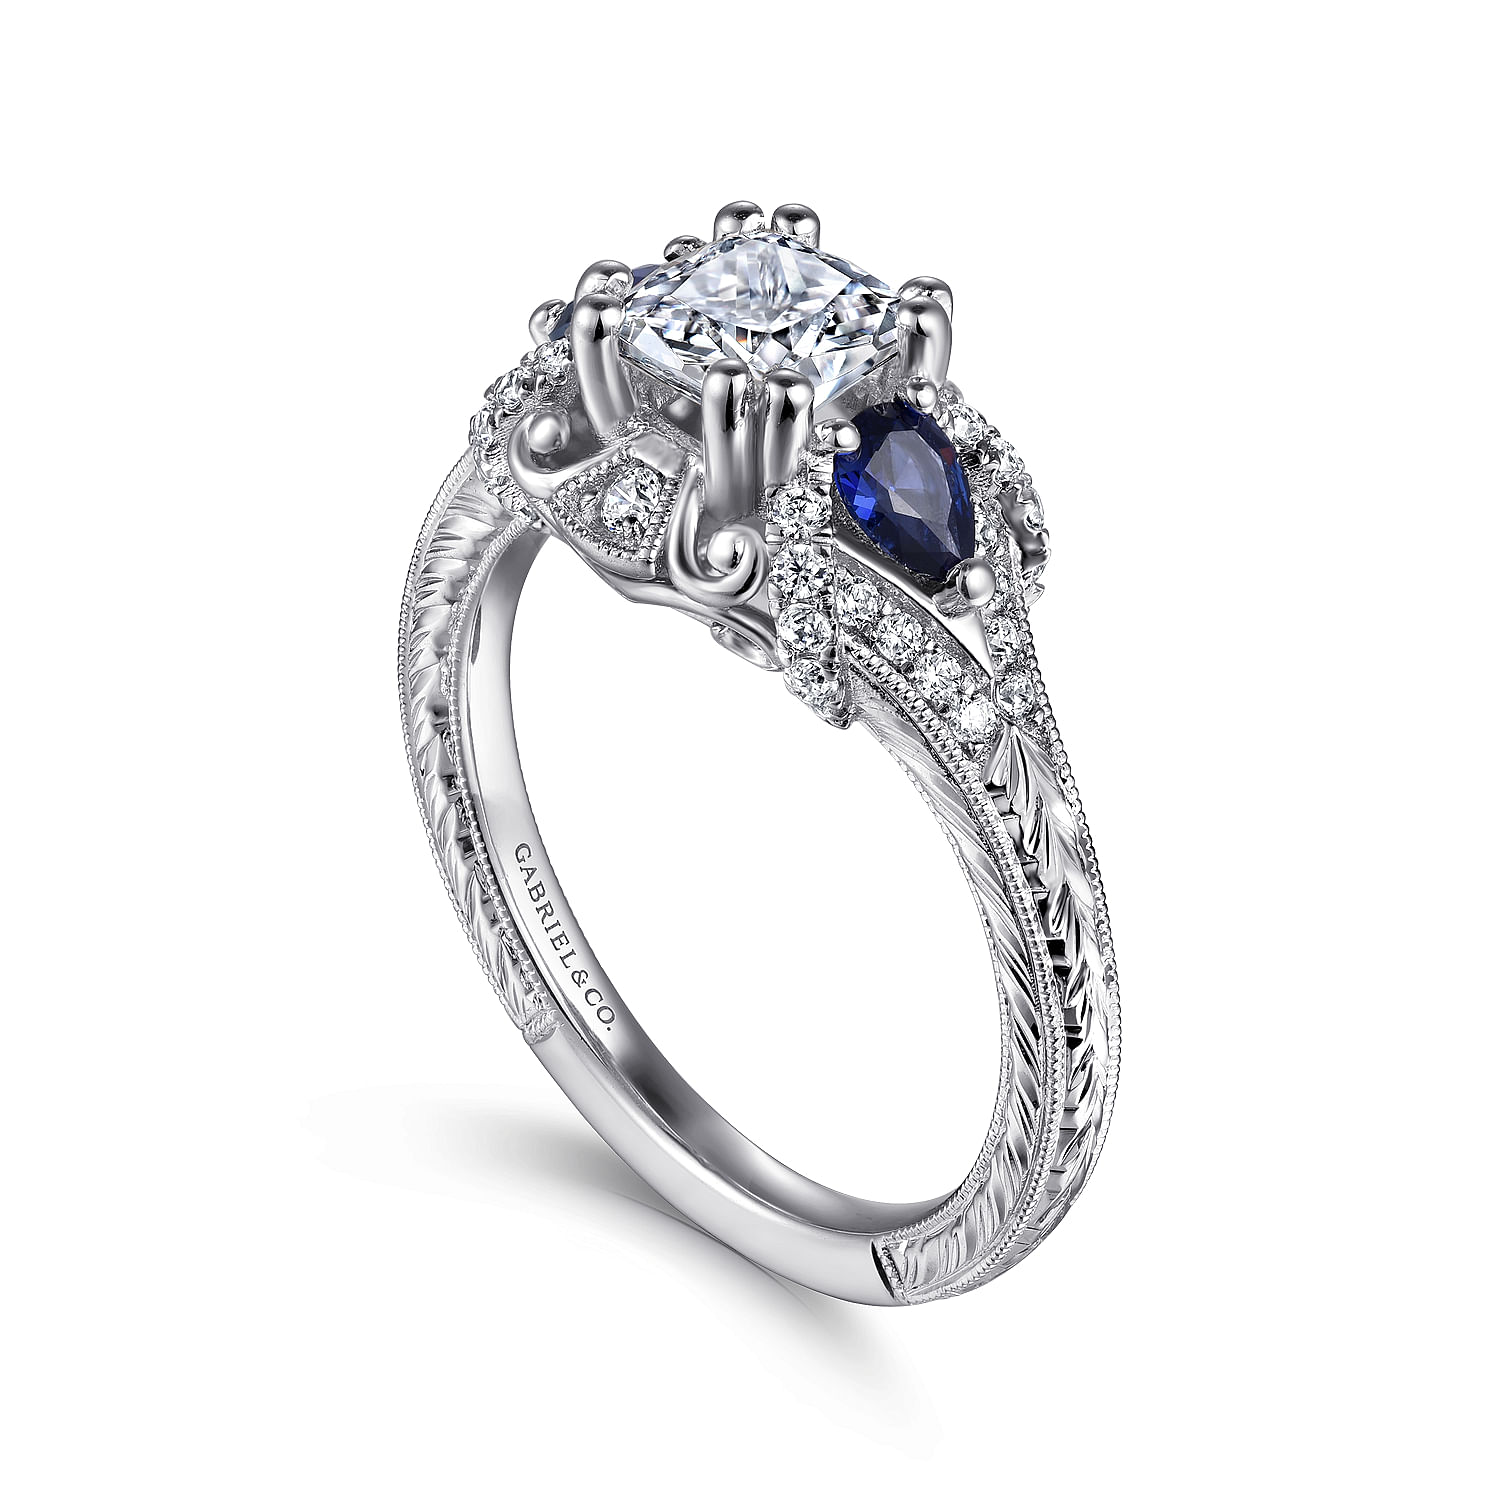 14K White Gold Cushion Cut Sapphire and Diamond Engagement Ring